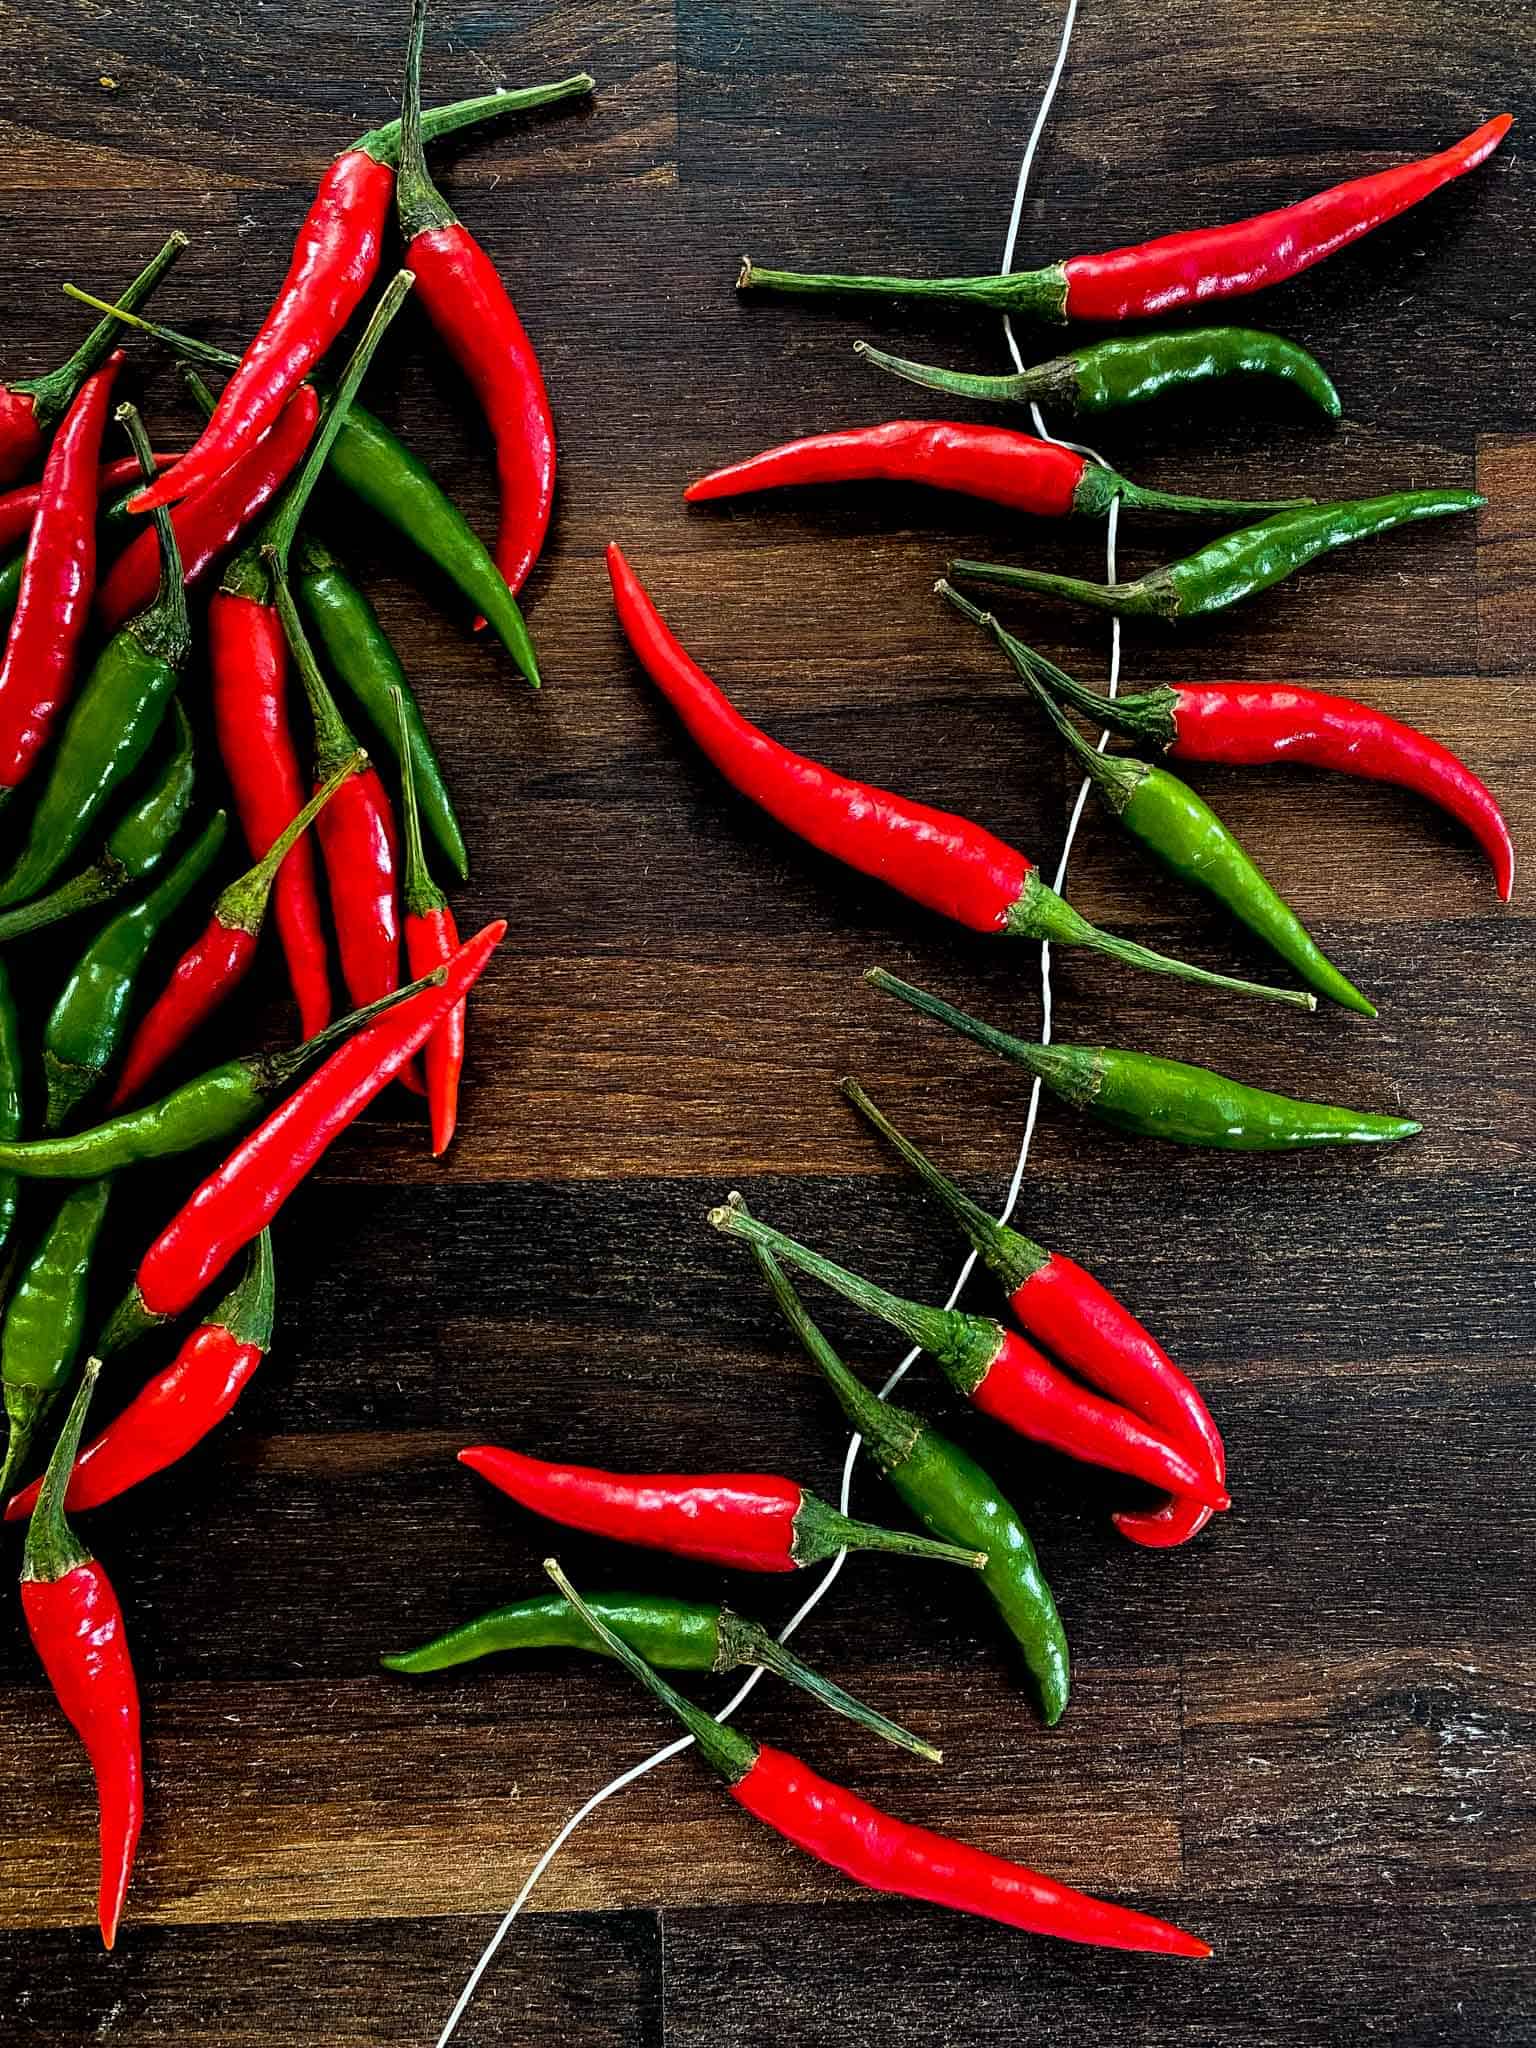 Chili peppers on a string, ready to be air dried.